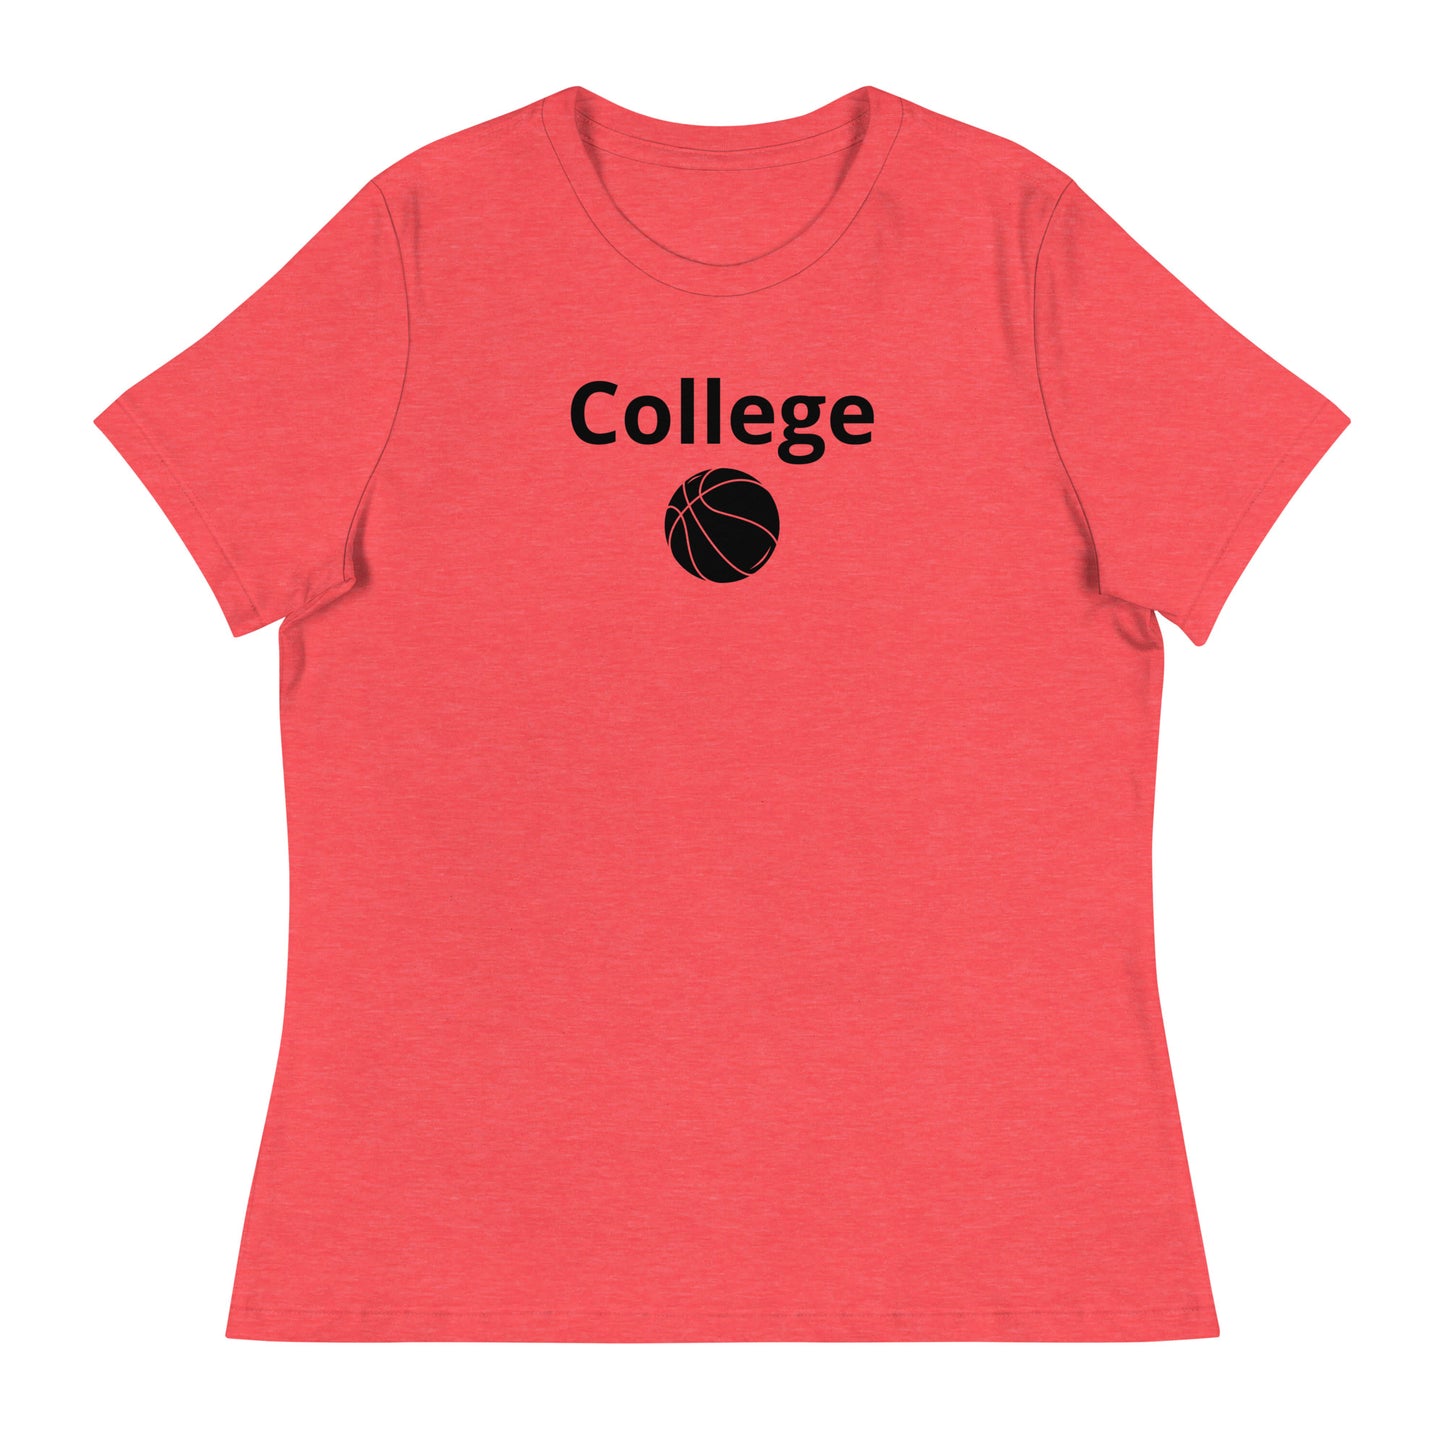 Women's college basketball graphic tee shirt in heather red